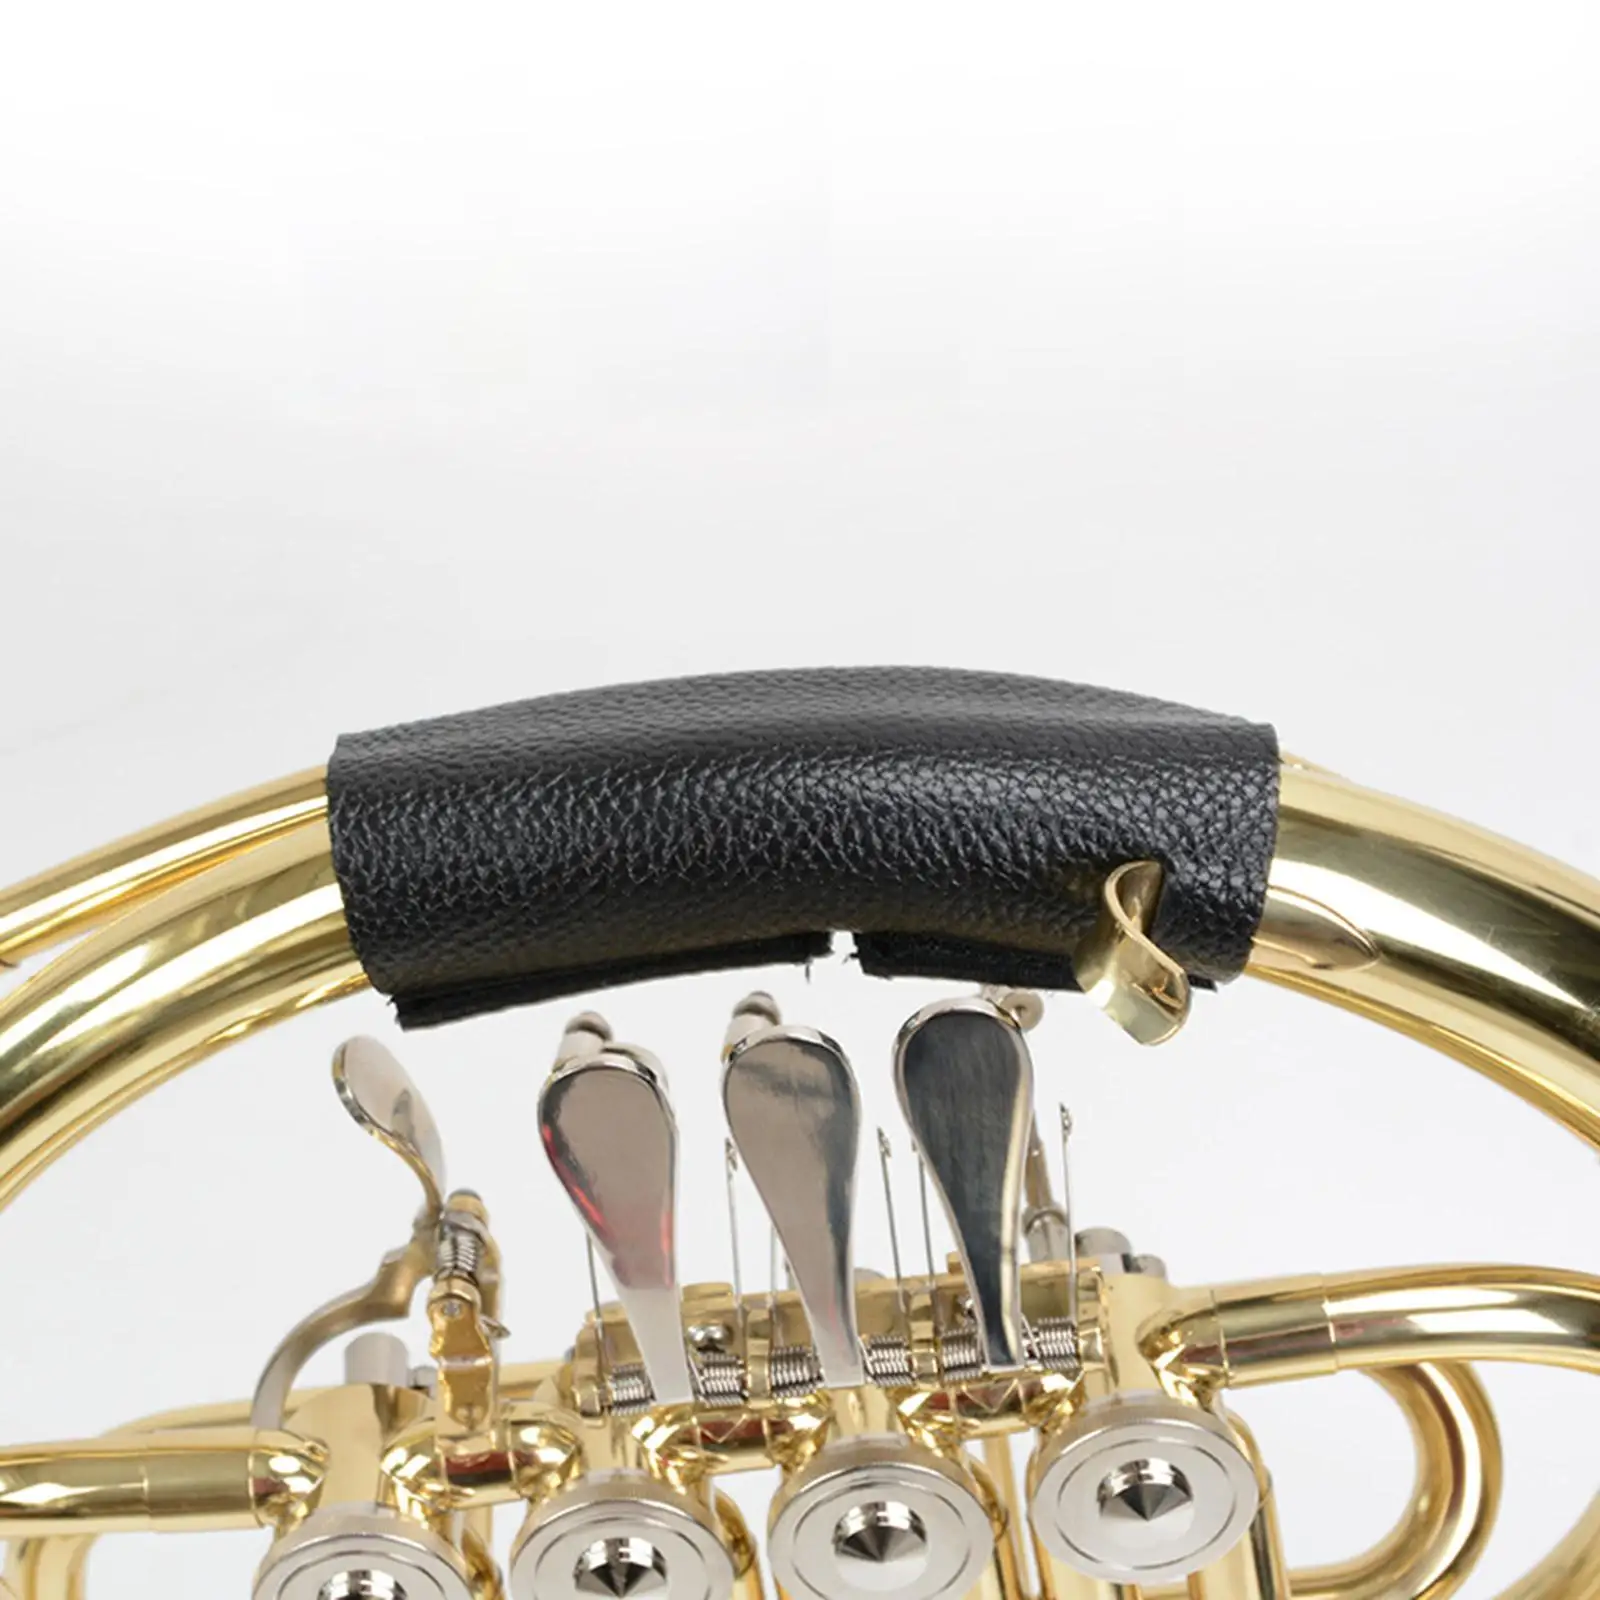 French Horn Hand Guard Non Slip Brass Instrument Accessory Adjustable Protective Cover Beginners Examinations Adult Kids